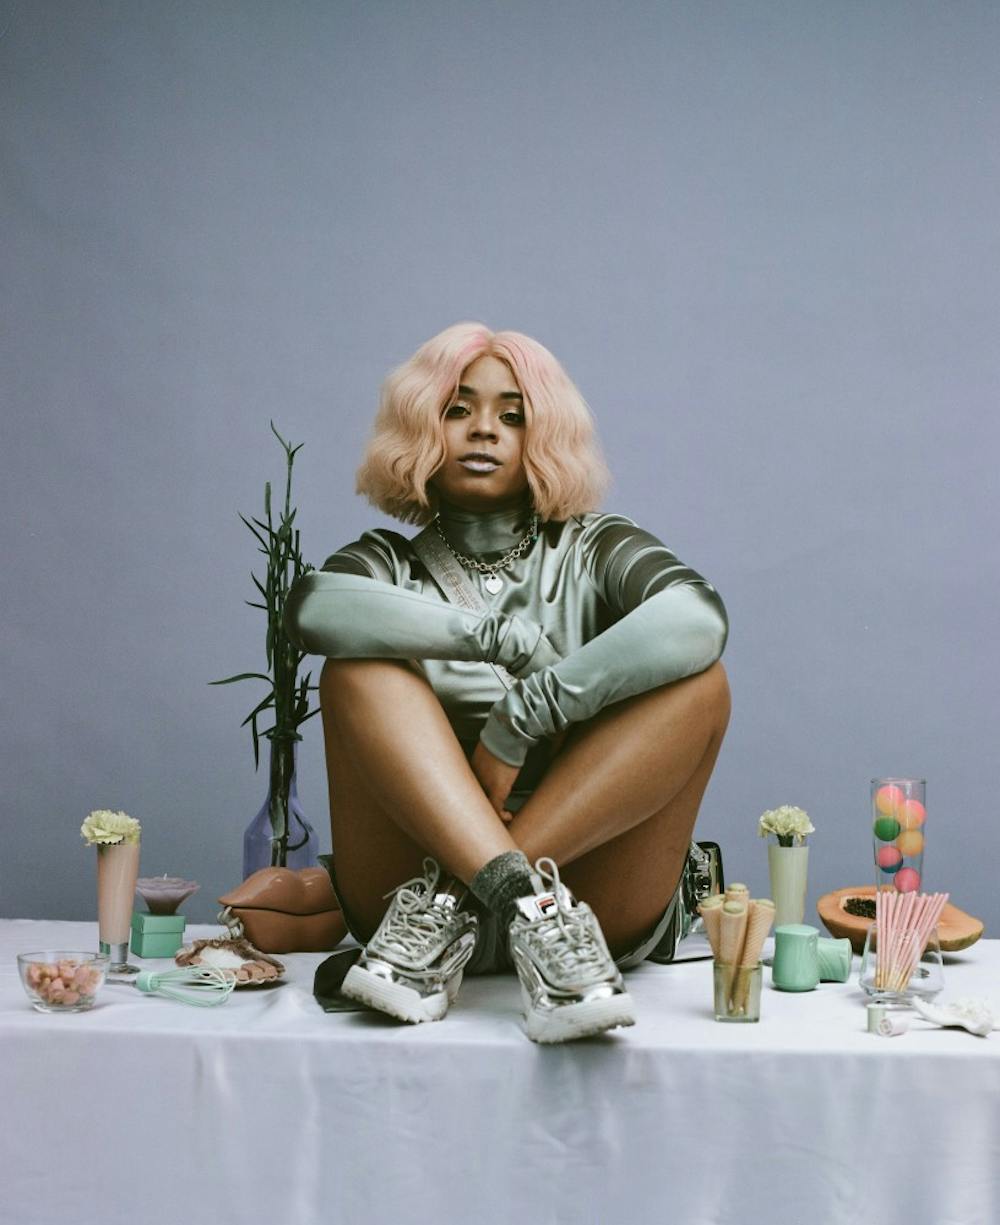 <p>Musician Tayla Parx is responsible for penning some of the biggest hits of 2018 and 2019. Parx drops her new album “We Need to Talk” on Friday.</p>